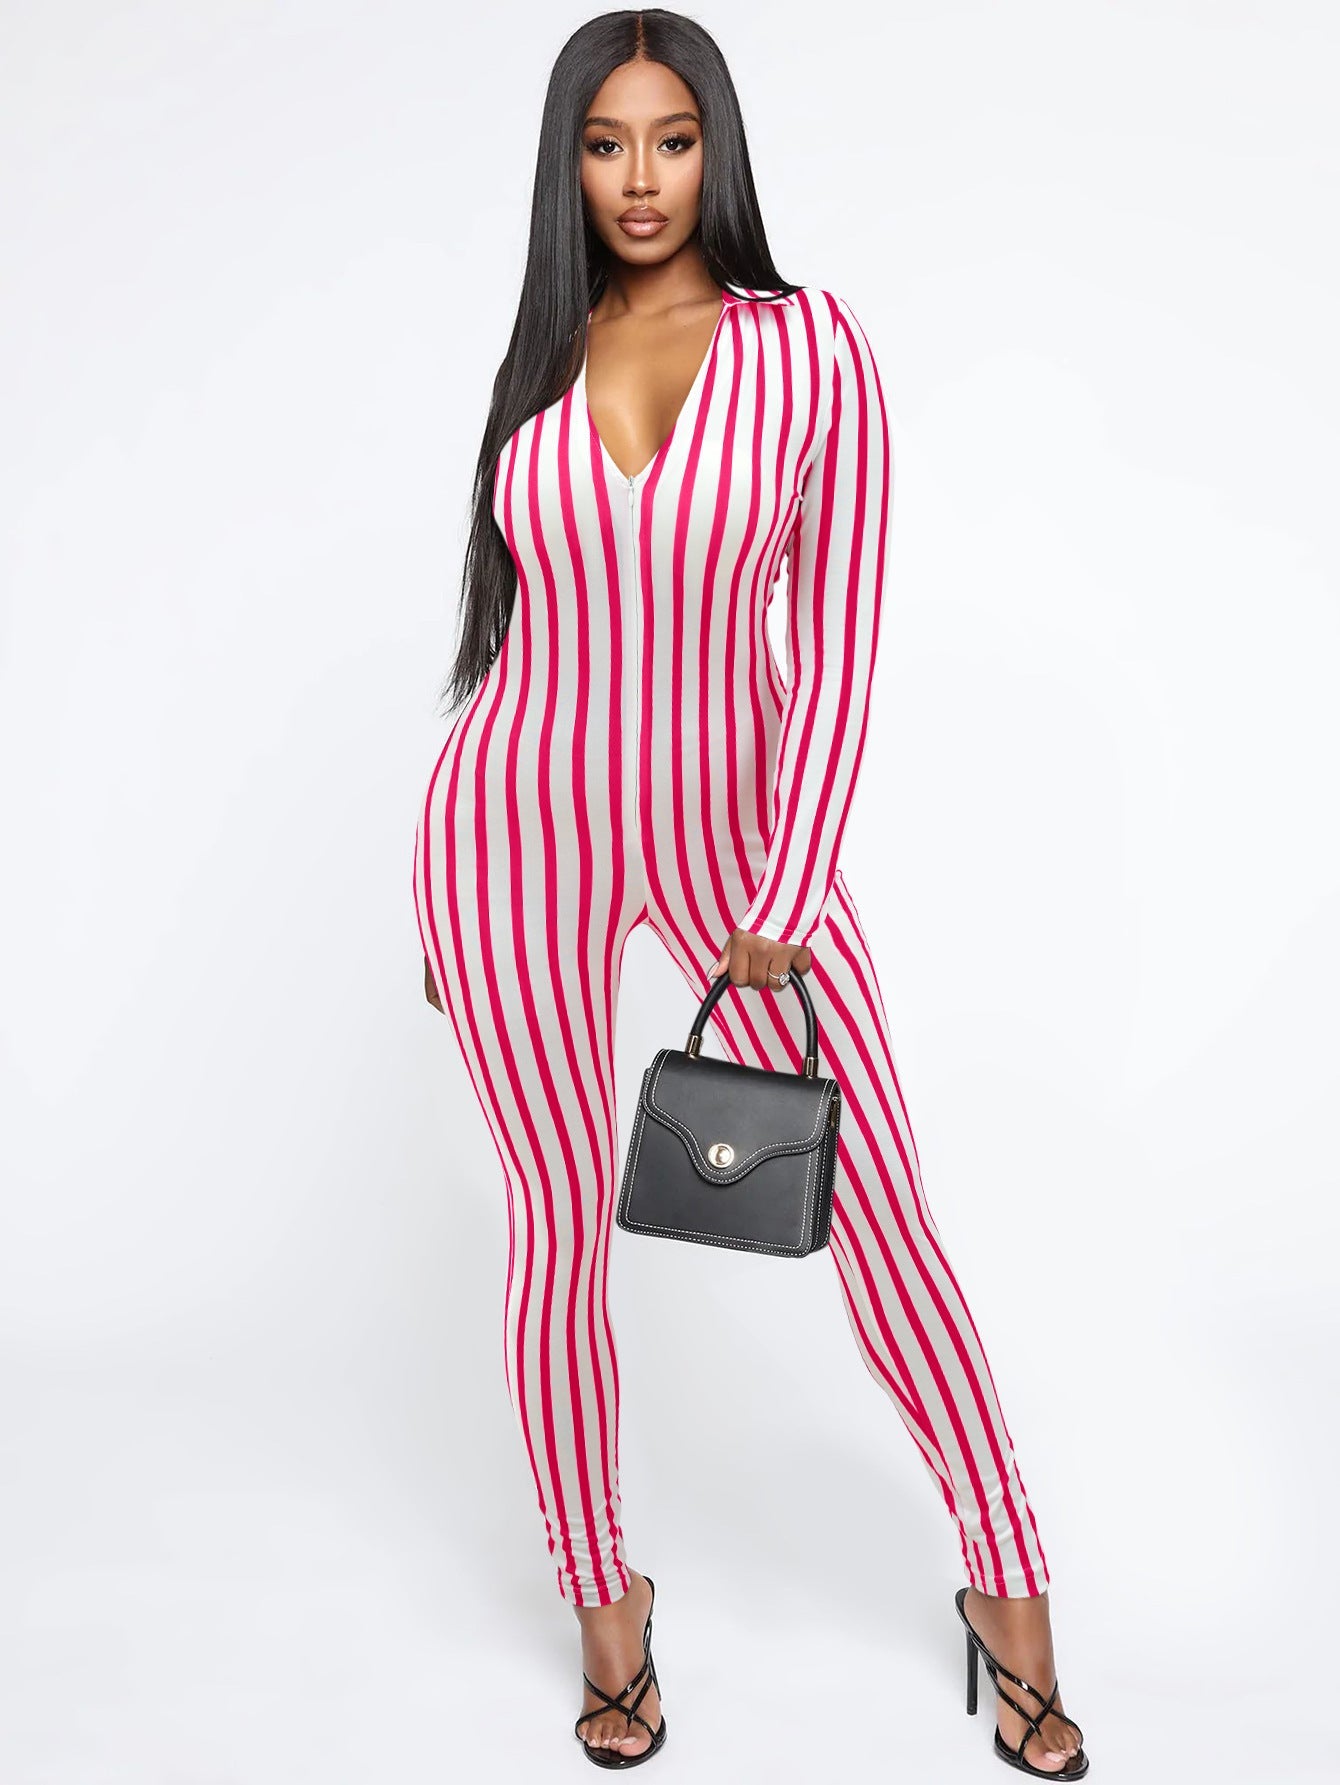 Fall Winter Striped Printed Casual Women Clothing Slim V-neck Long Sleeve Jumpsuit